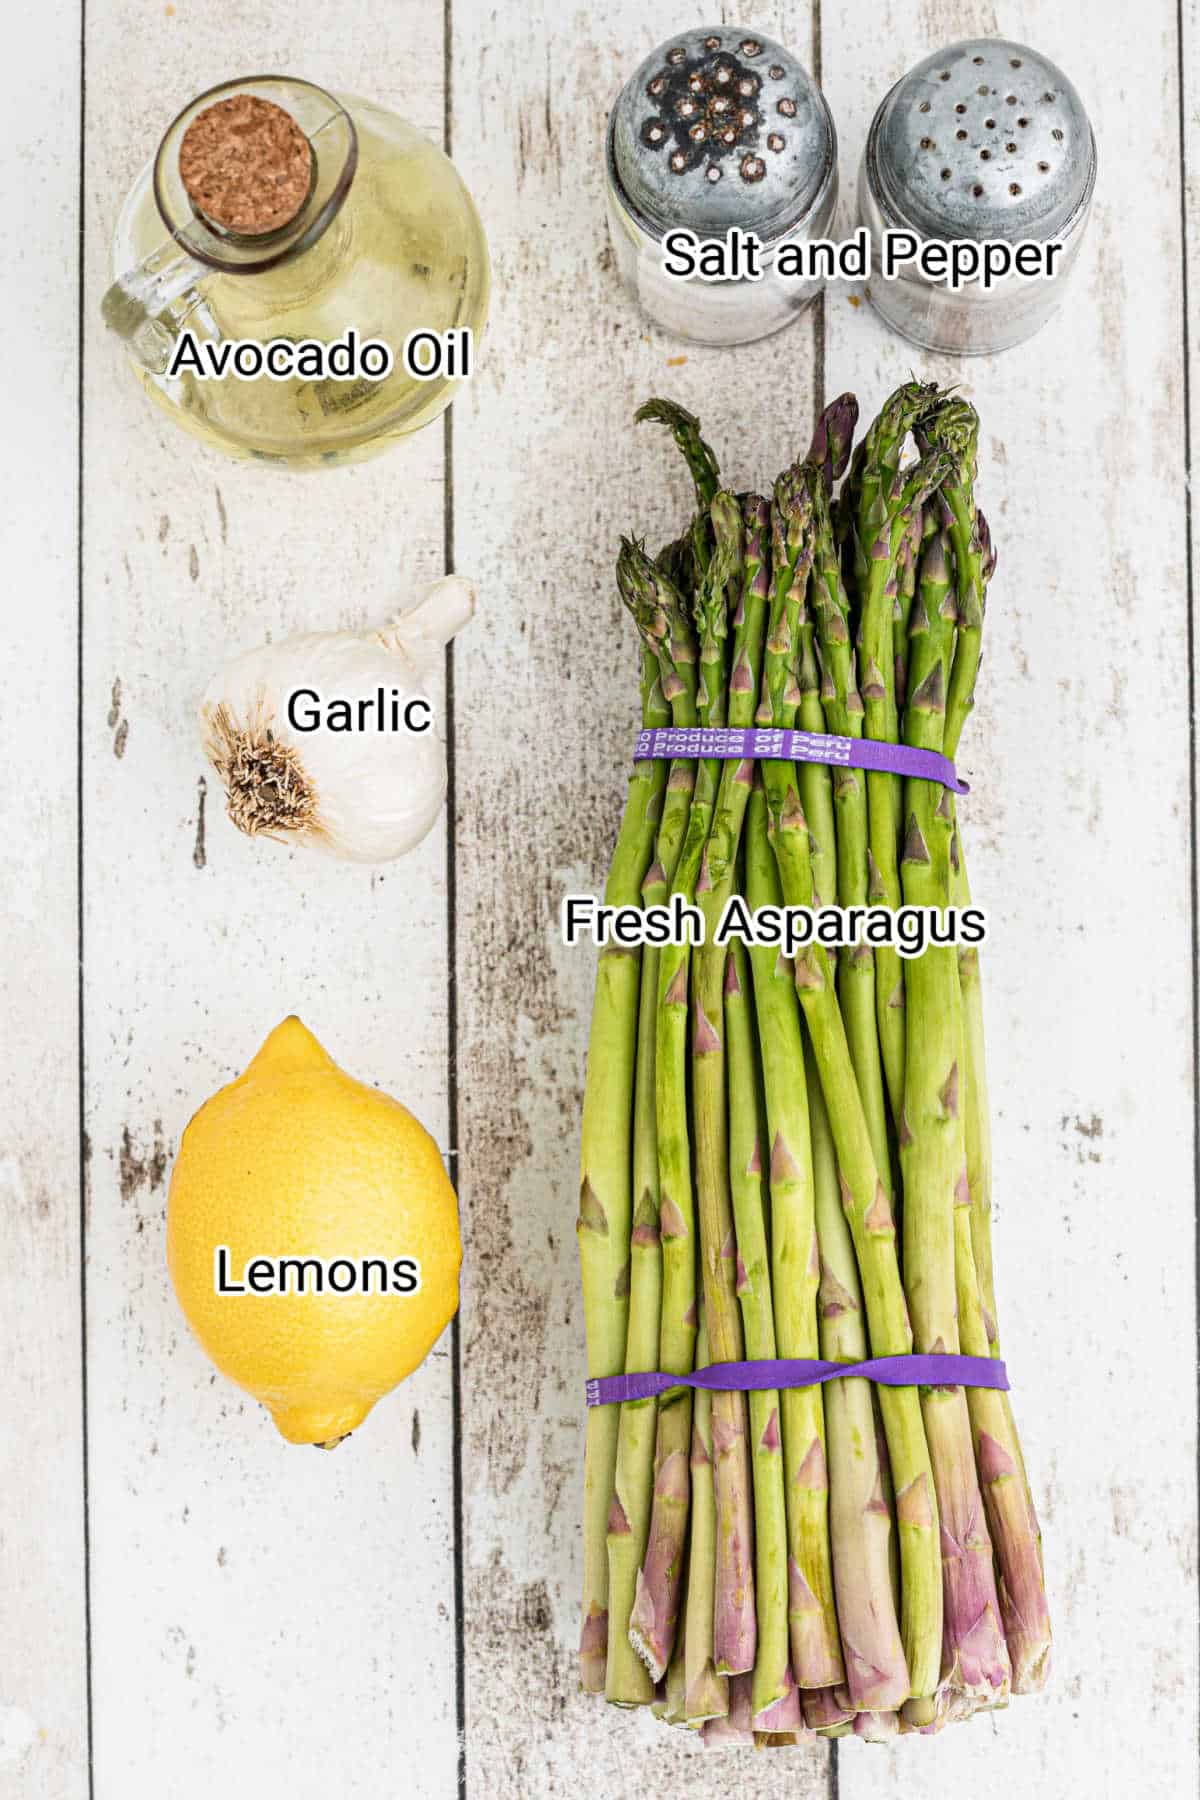 smoked asparagus ingredients with text overlay describing the ingredients.